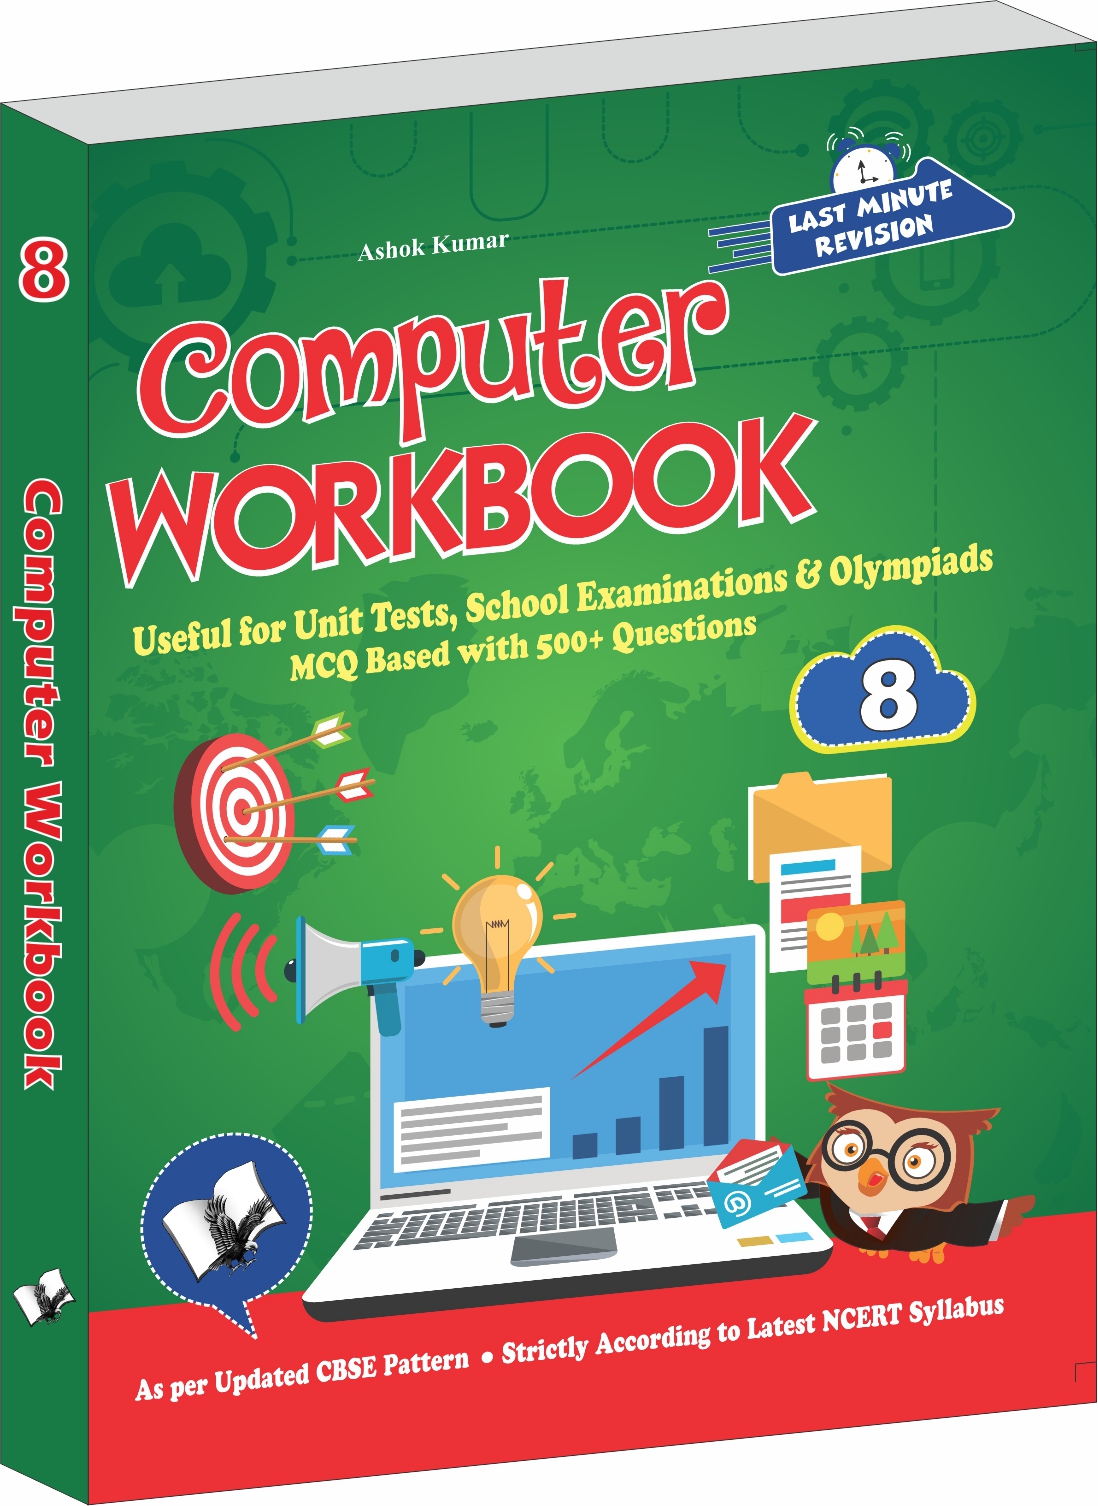 computer-workbook-class-8-useful-for-unit-tests-school-examinations-olympiads